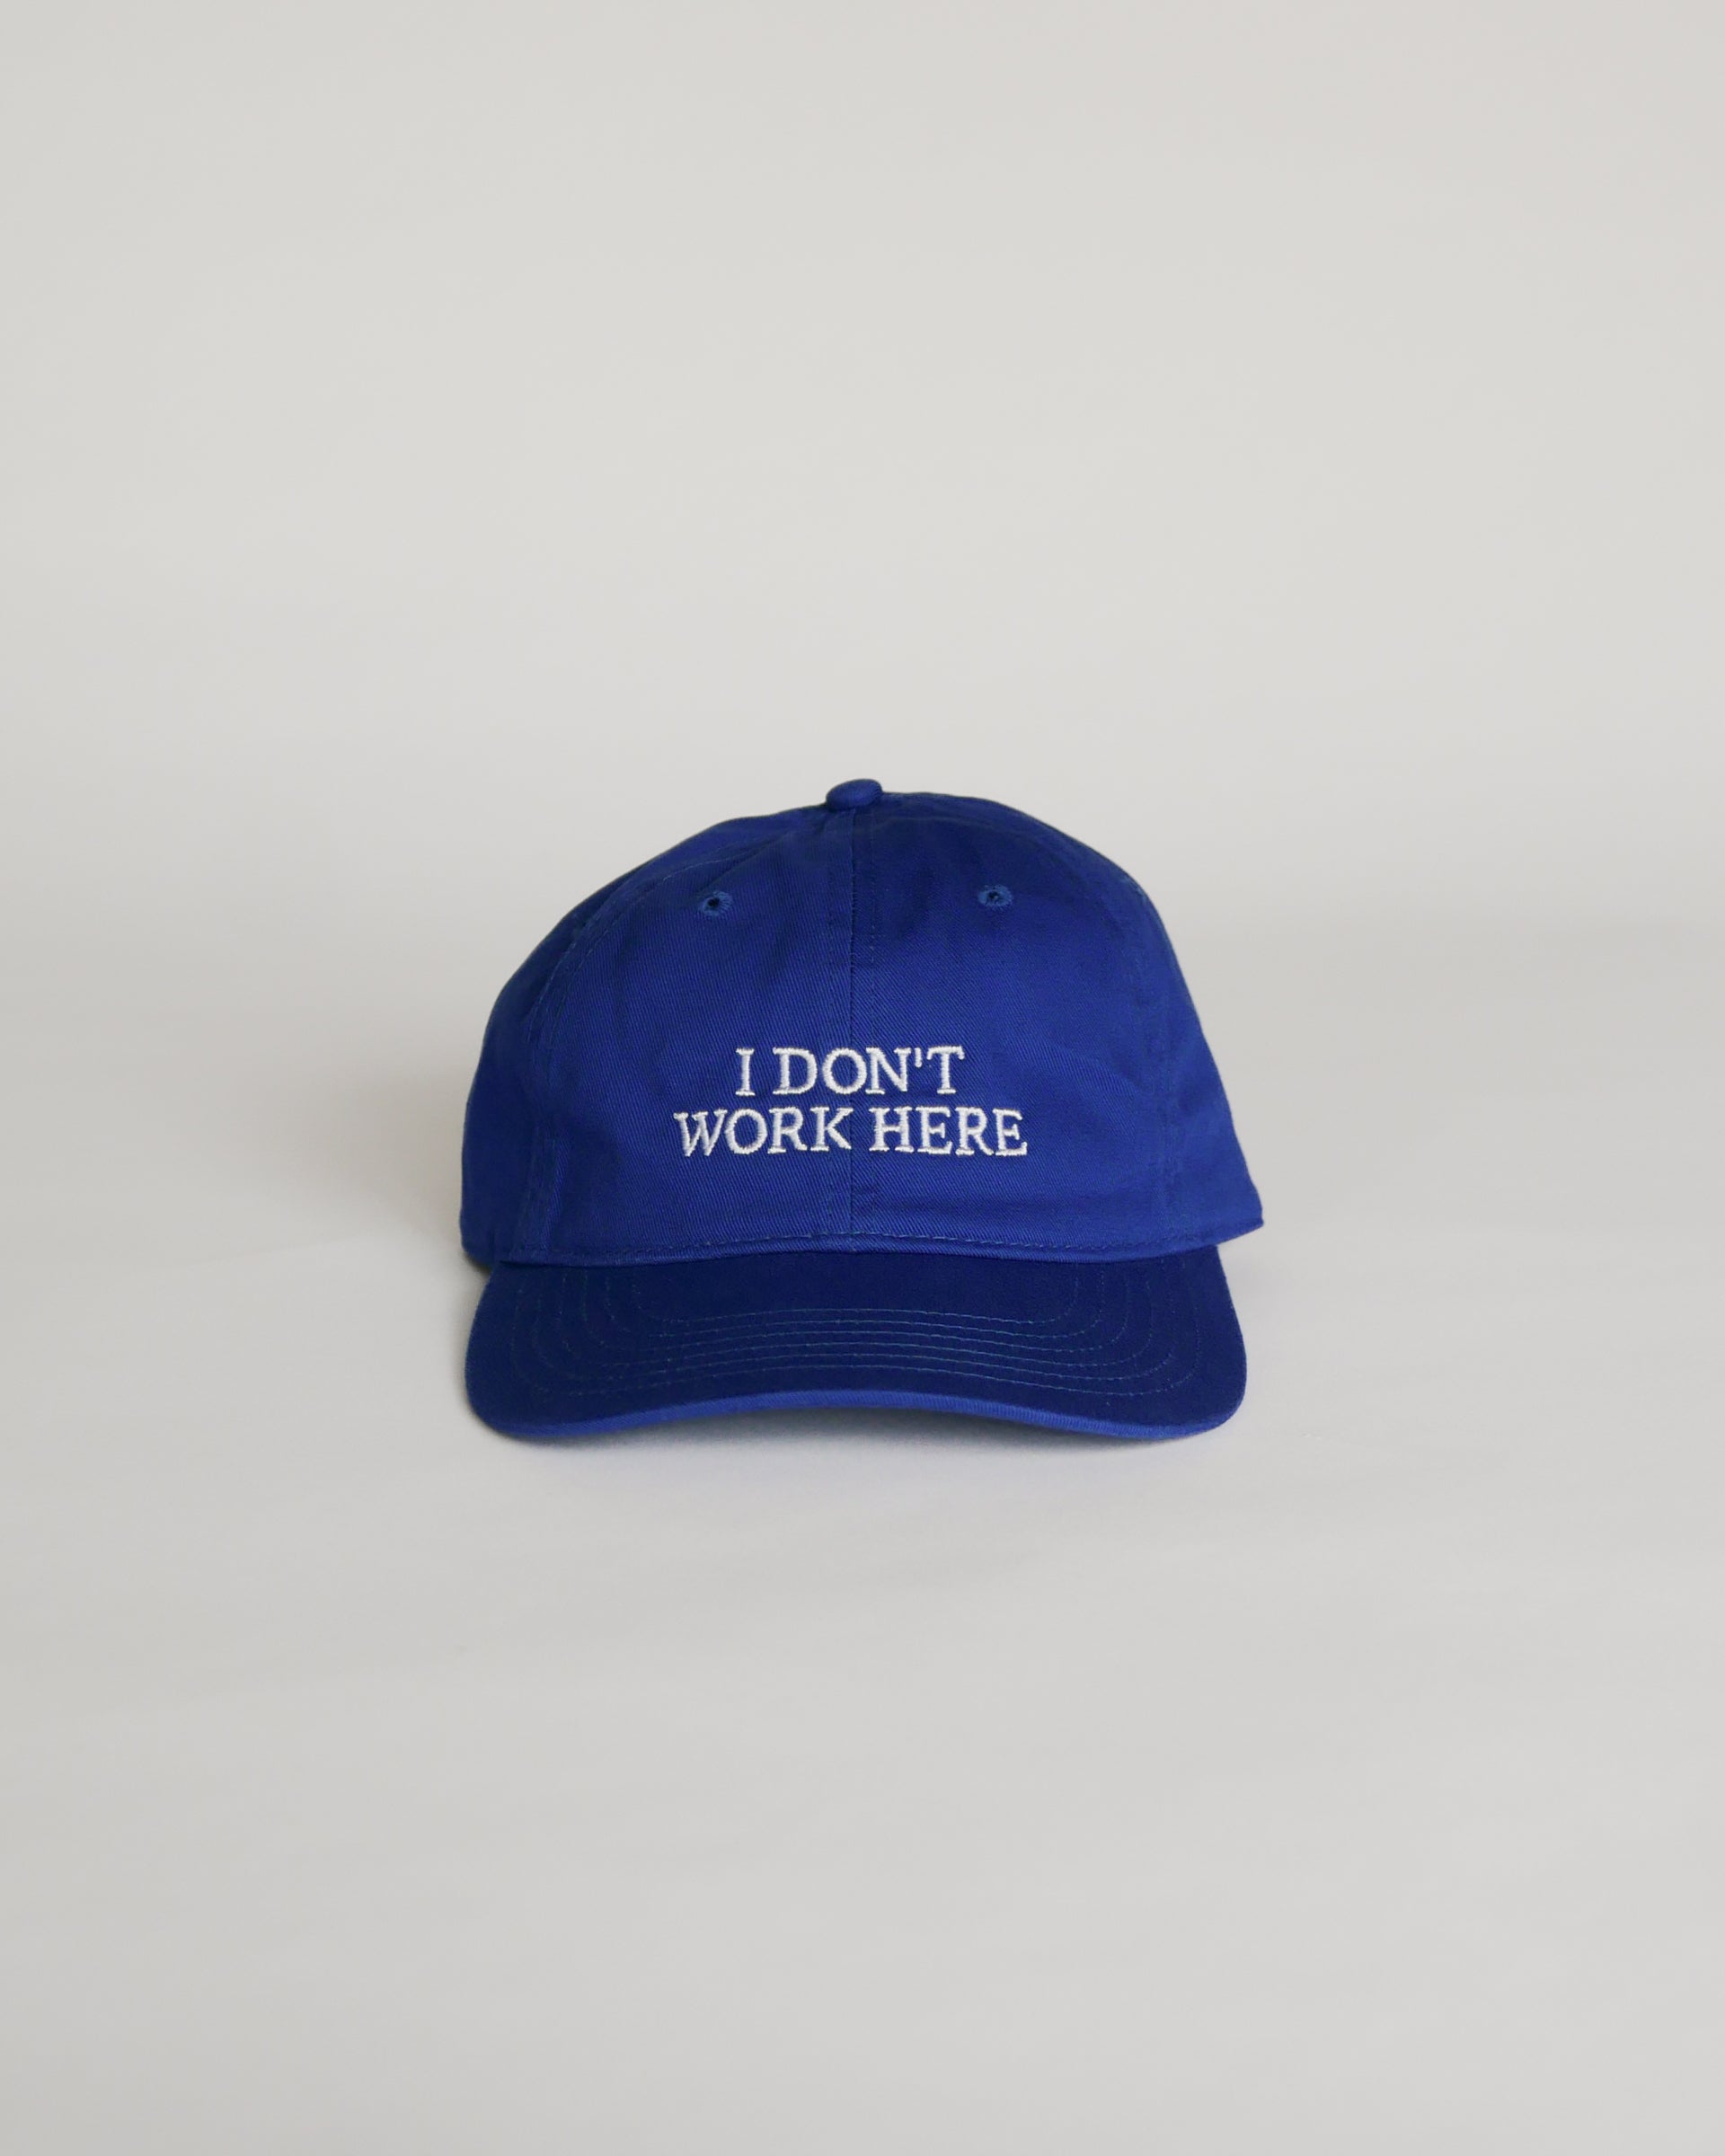 IDEA Books Sorry I Don't Work Here Hat (Royal Blue) – SORT